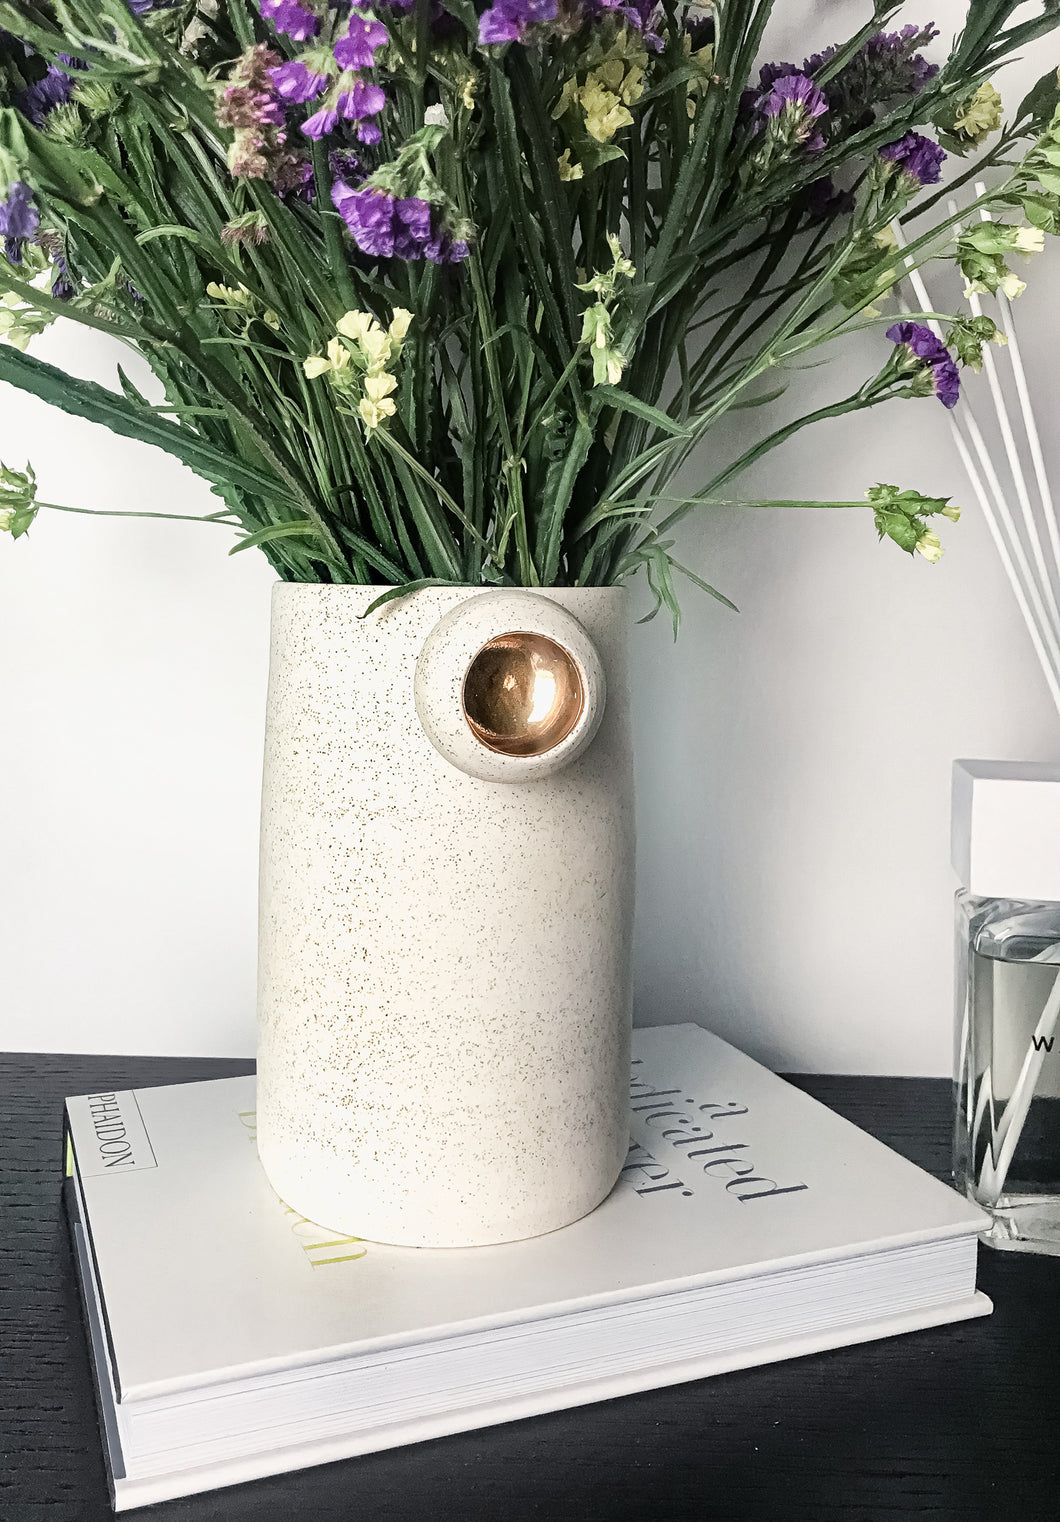 Original Hand-made Ceramic Vase - White Speckled Vase With Gold Ball - Truly One Of A Kind